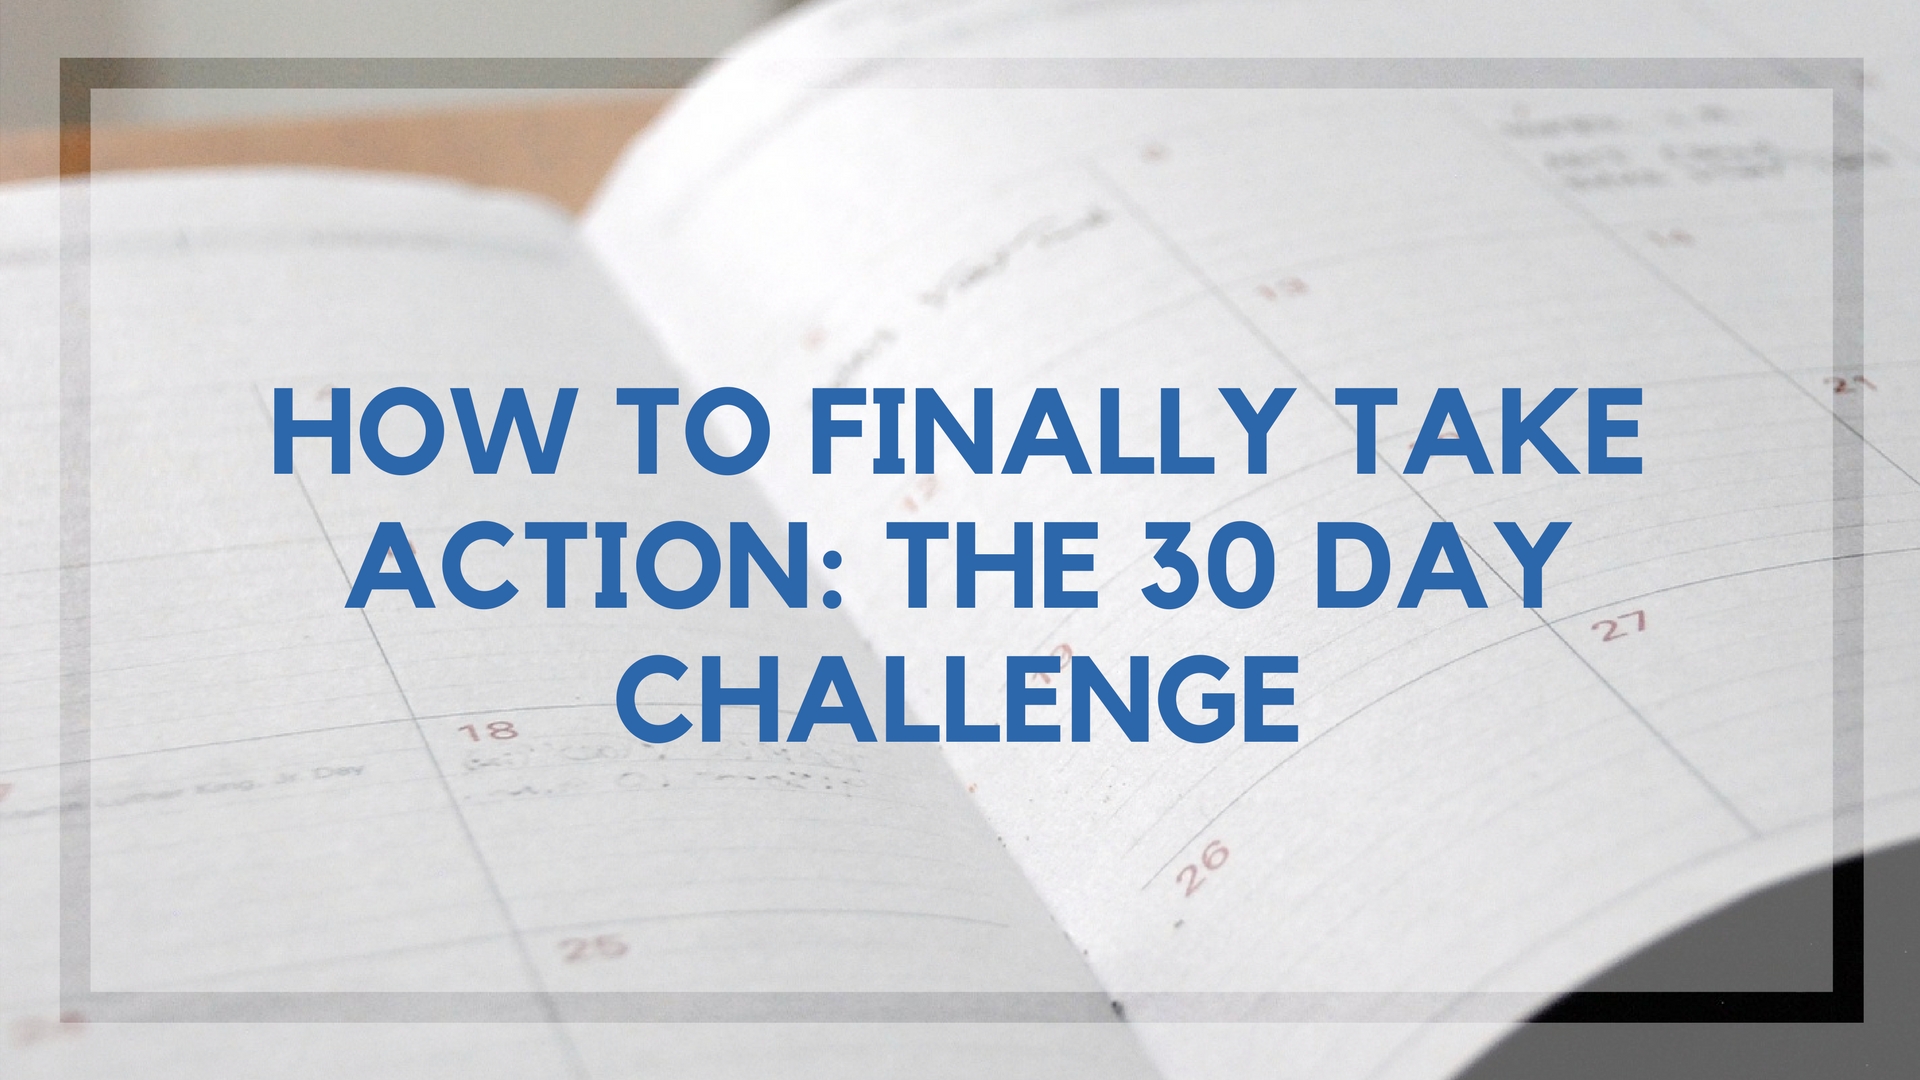 How To Finally Take Action: The 30 Day Challenge